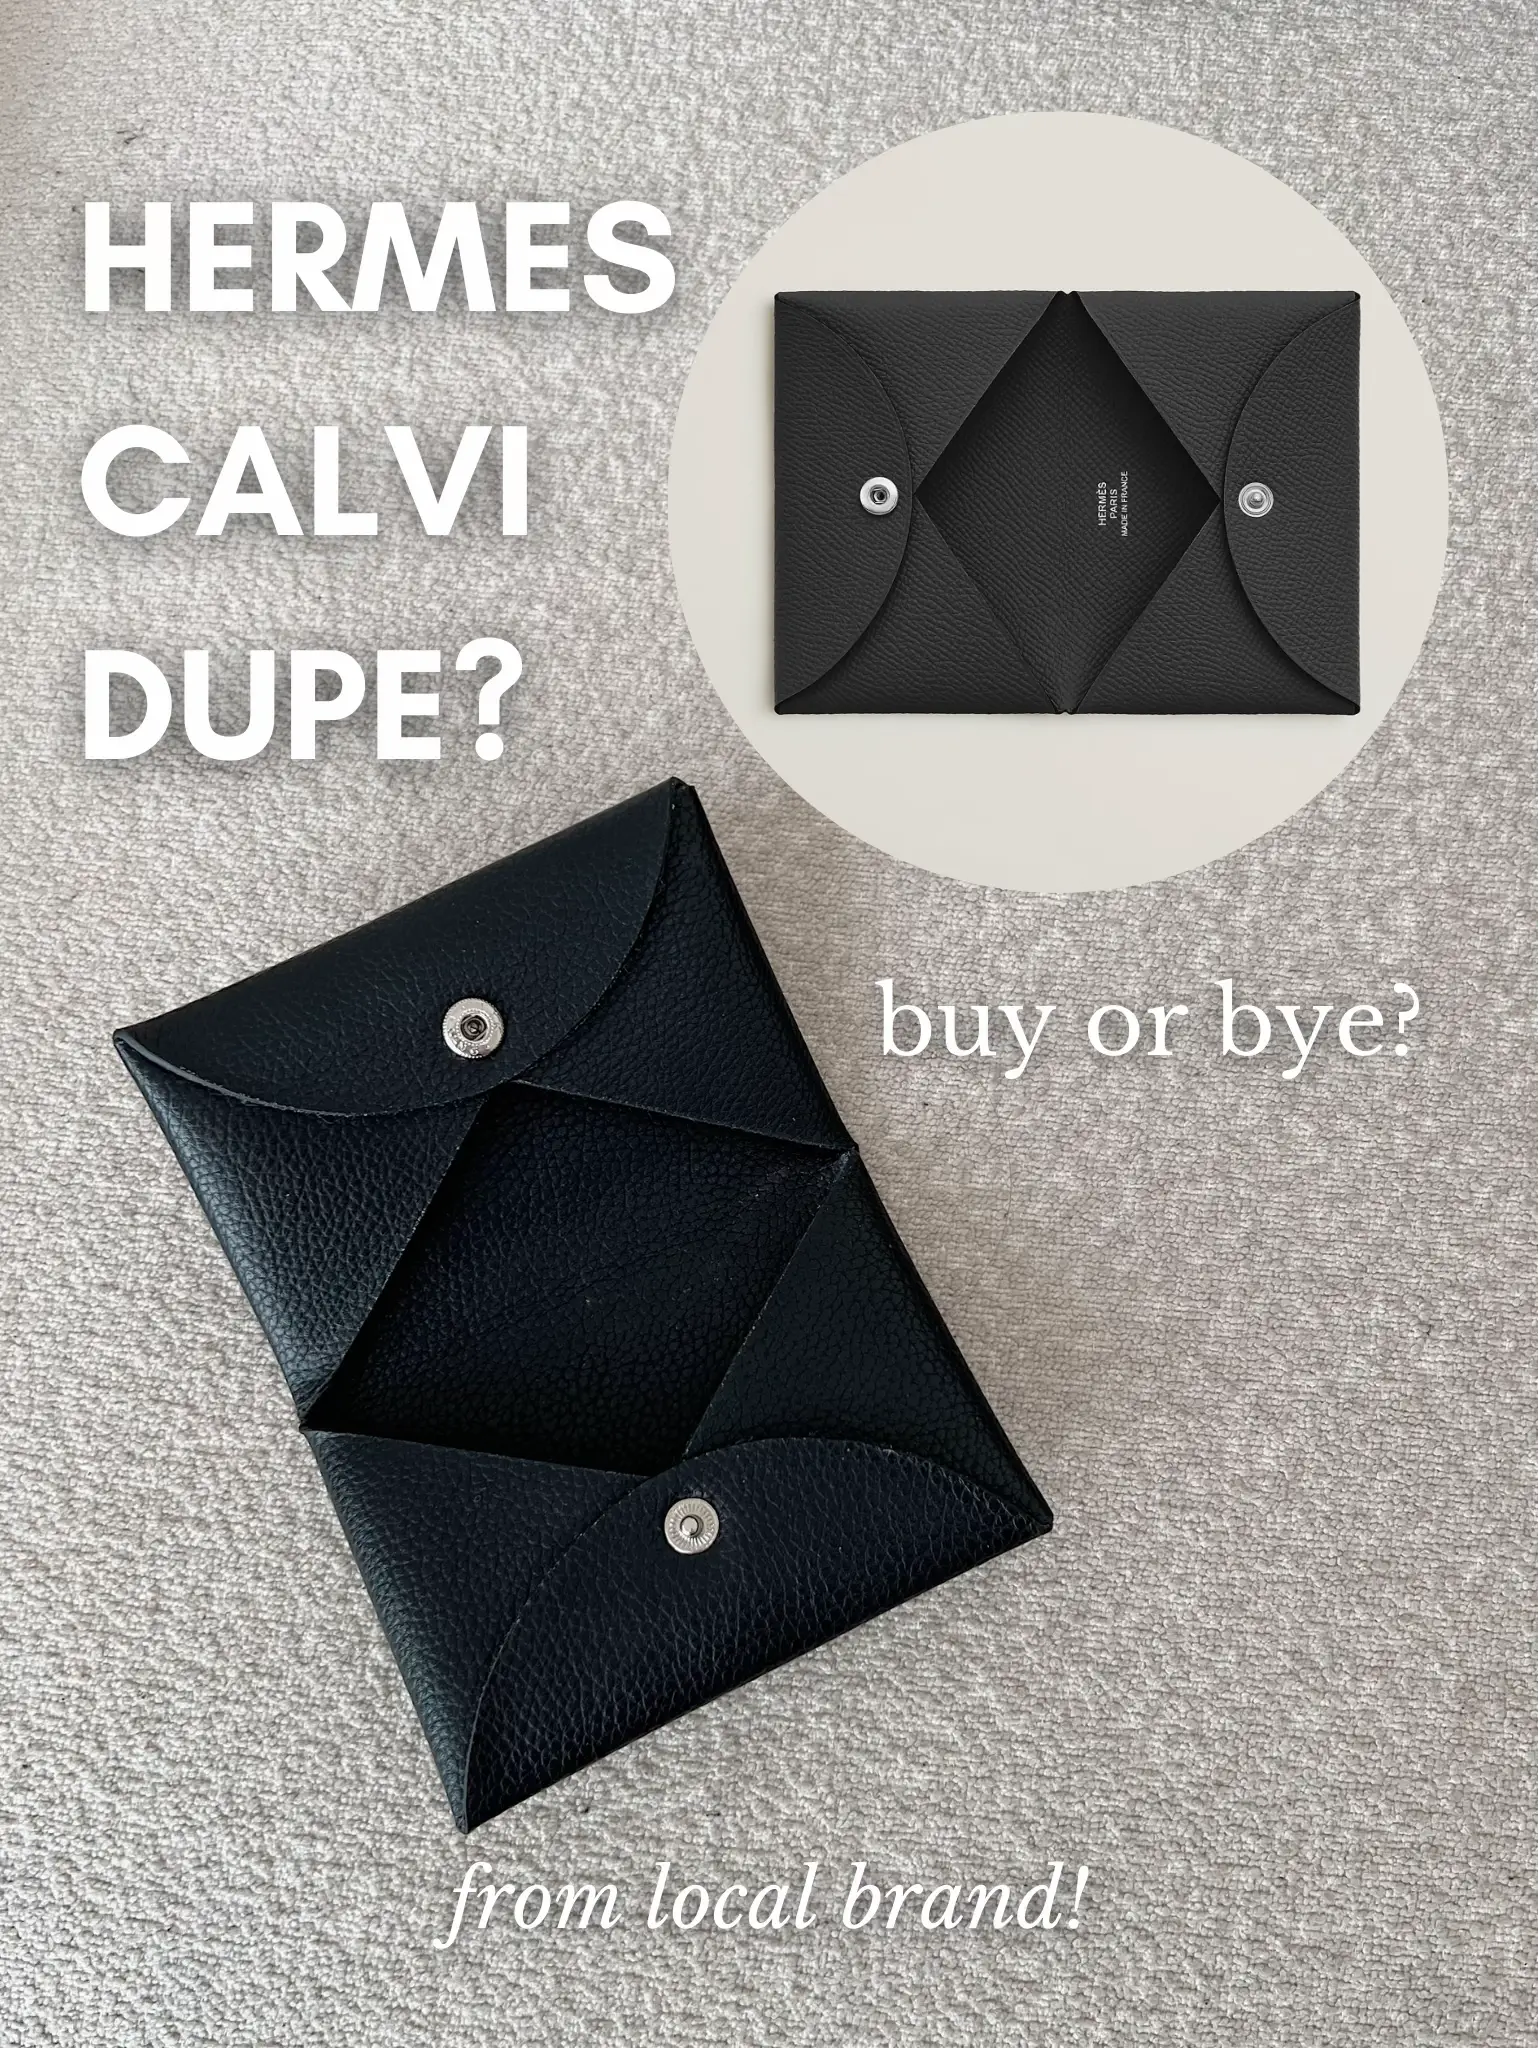 Hermes Calvi vs. Chanel Cardholder Review - Comparing What Fits and Are  They Worth It? 